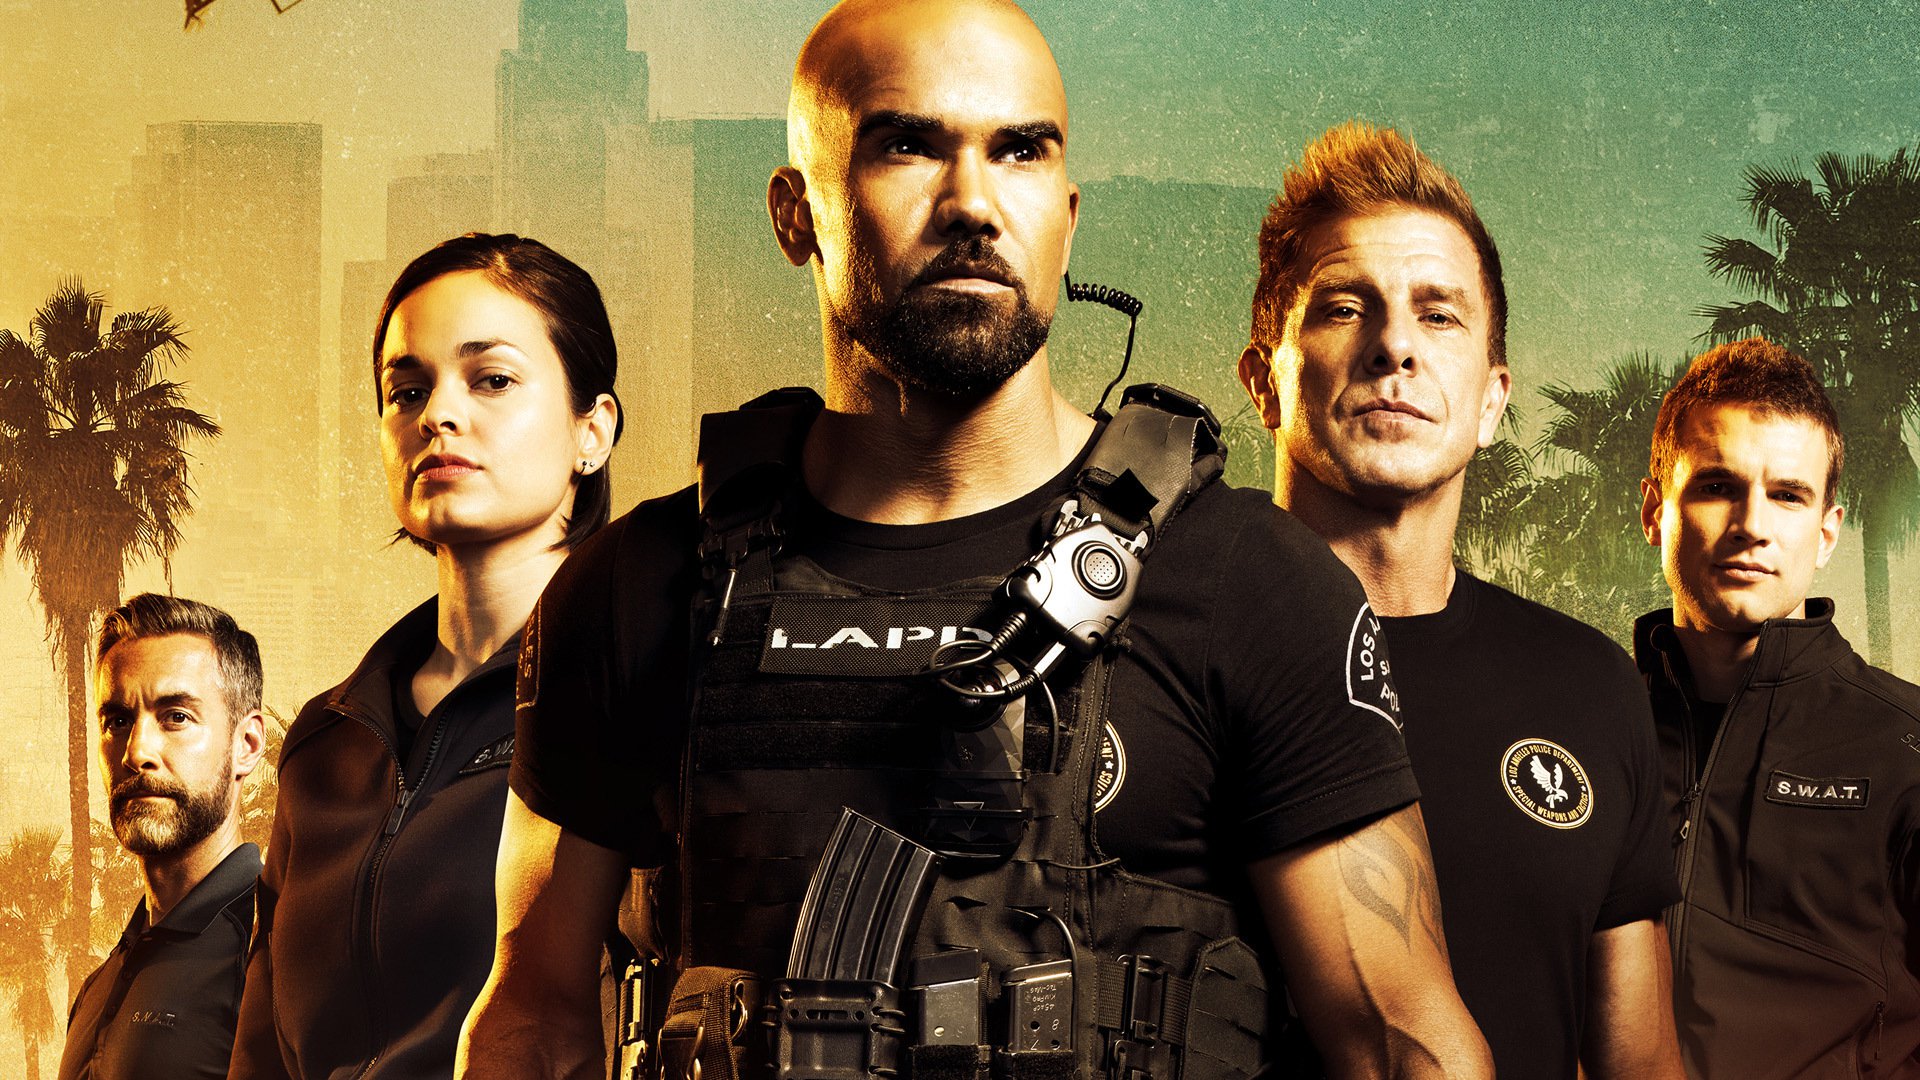 TV Show S.W.A.T. HD Wallpaper | Background Image